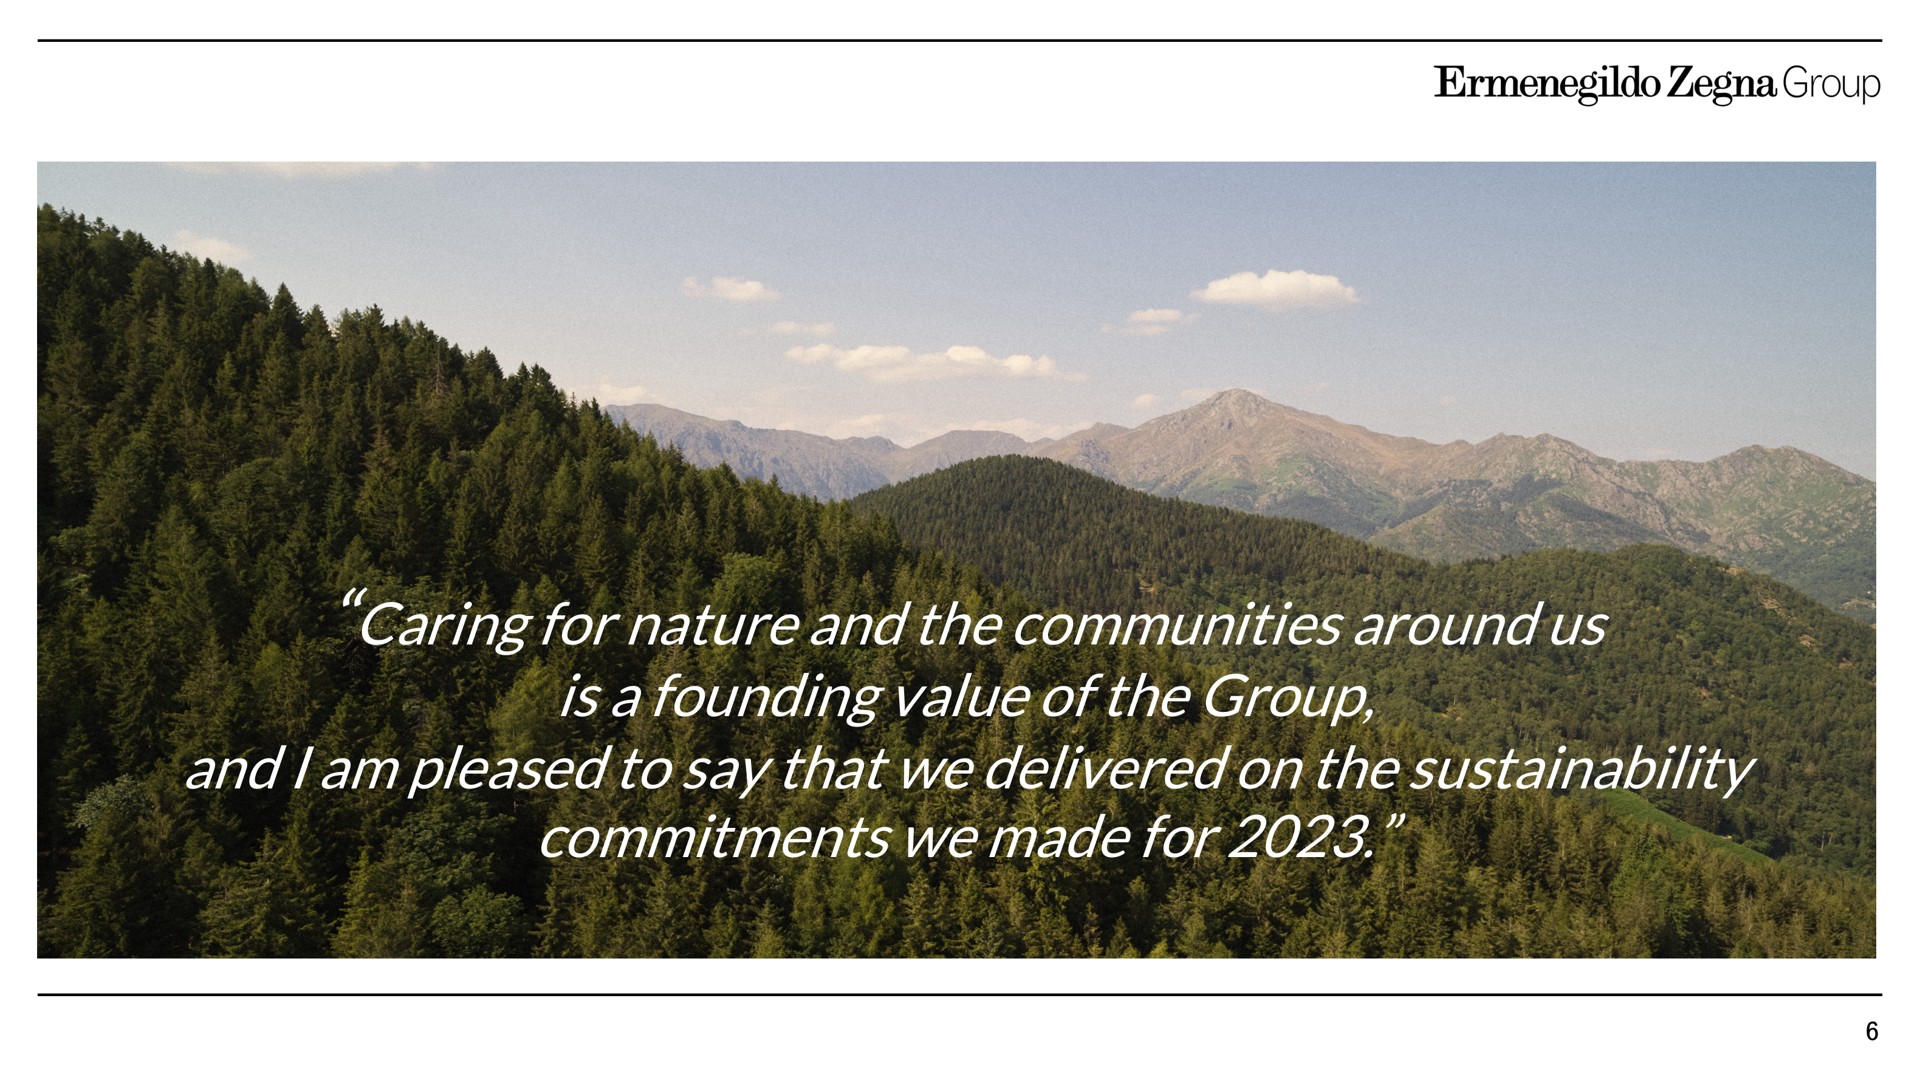 caring for nature and the communities around us is a founding value of the group and i am pleased to say that we delivered on the commitments we made for ale lam dint as | Zegna